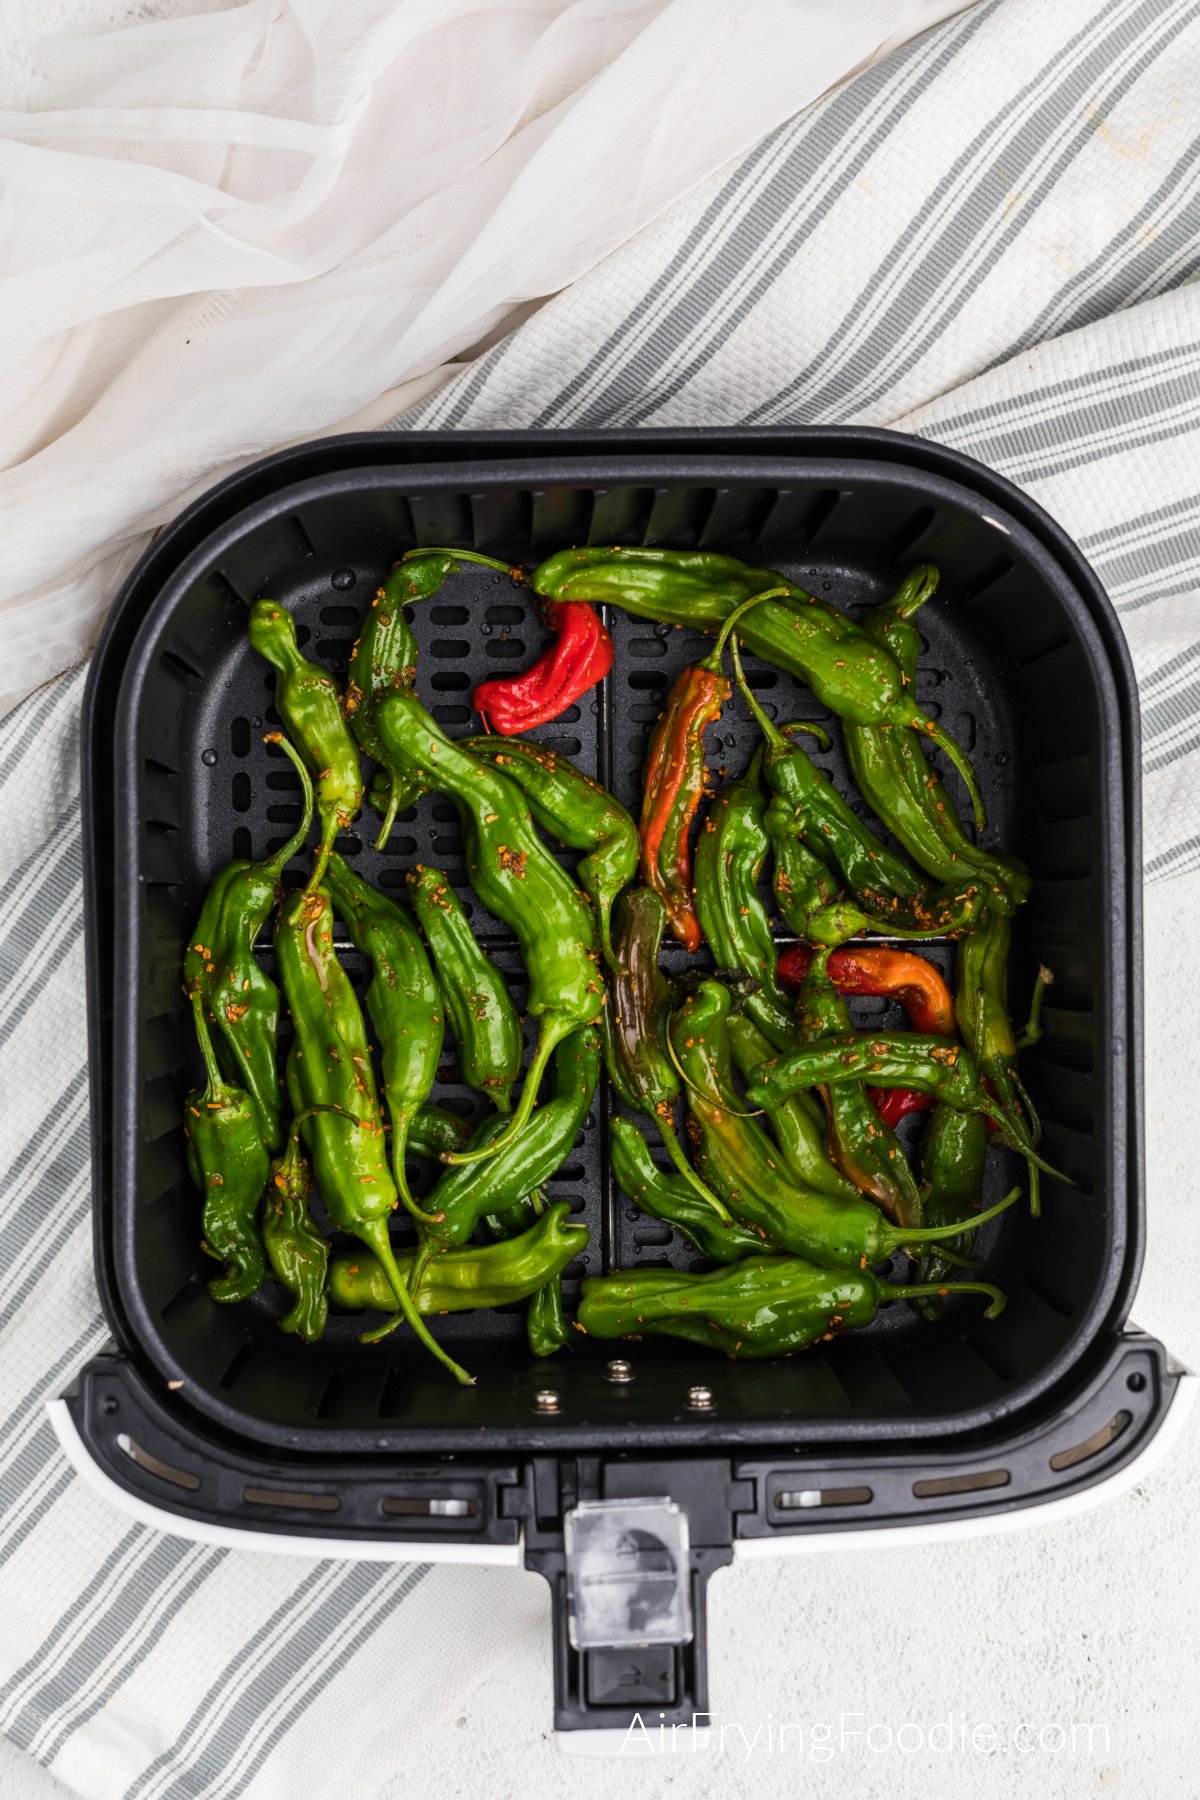 Seasoned and oiled shishito peppers in the basket of the air fryer.